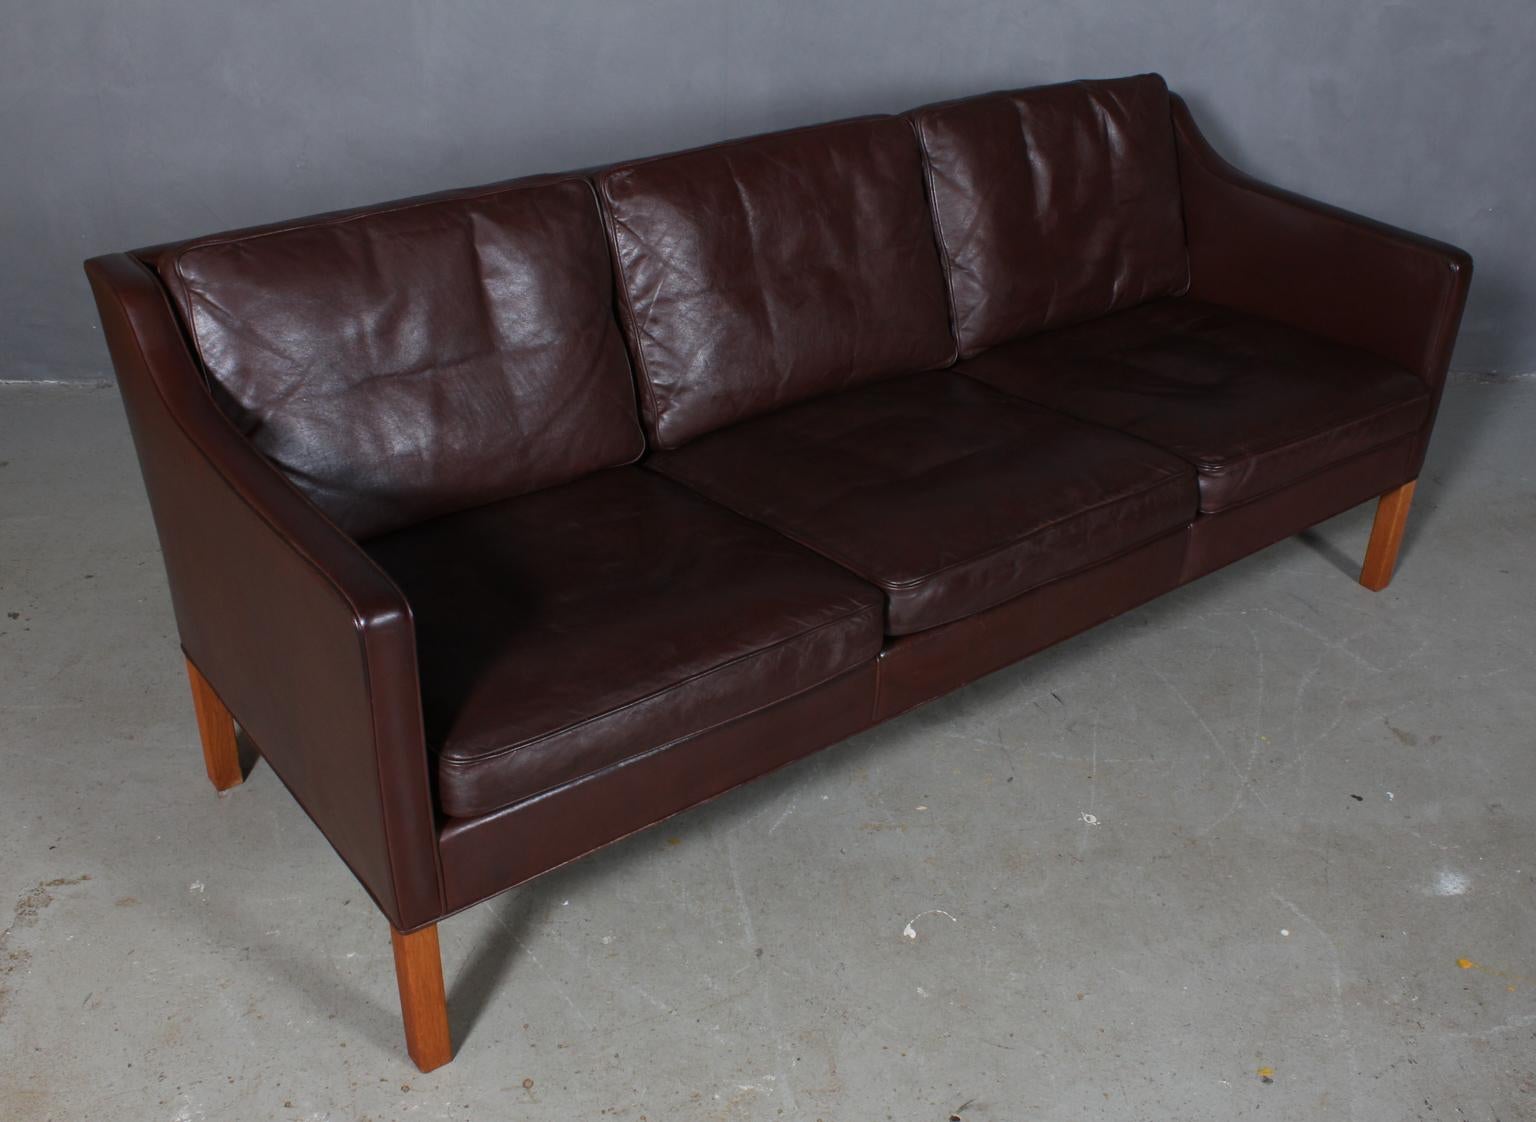 Børge Mogensen three-seat sofa original upholstered with brown leather.

Legs of oak.

Model 2323, made by Fredericia Furniture.